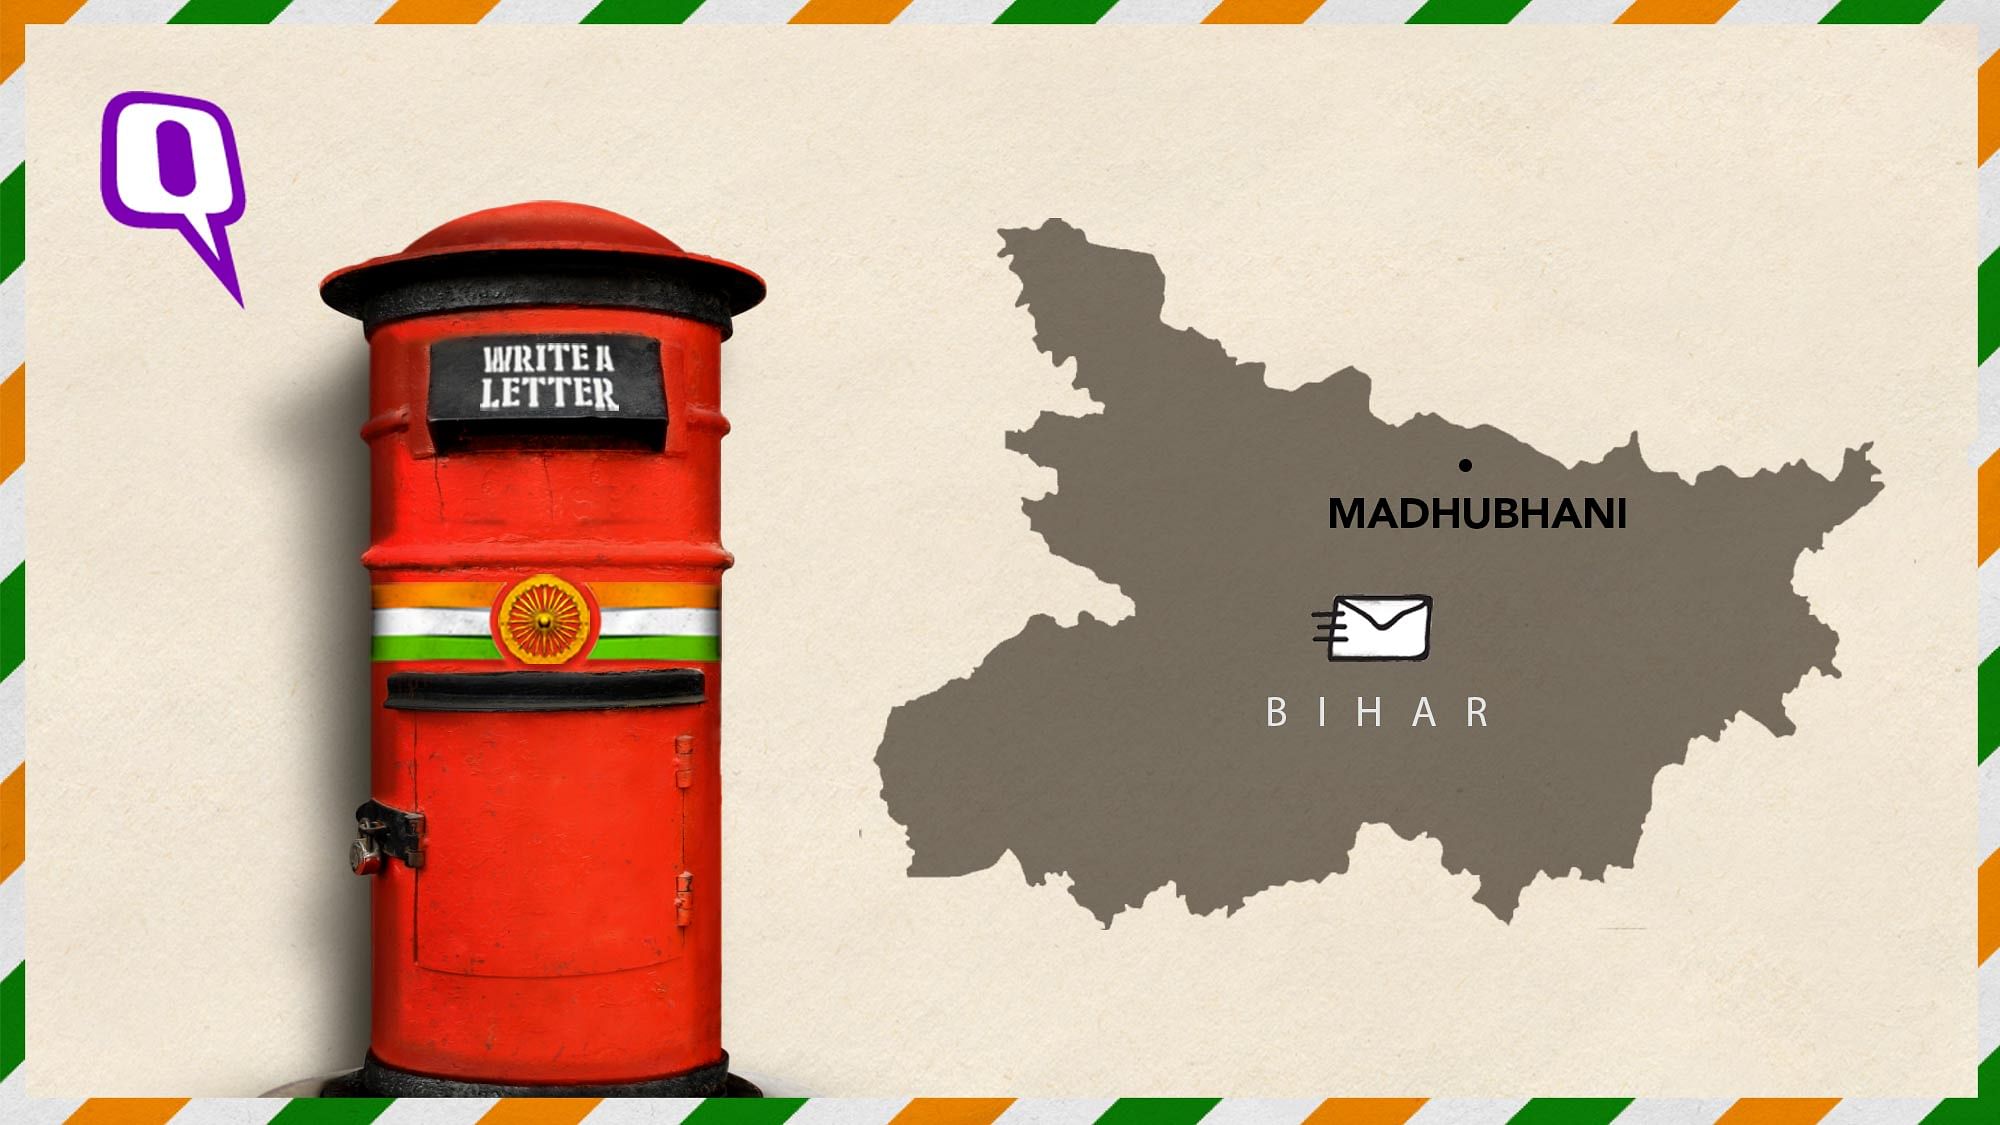 Write your Letter to India this Republic Day.